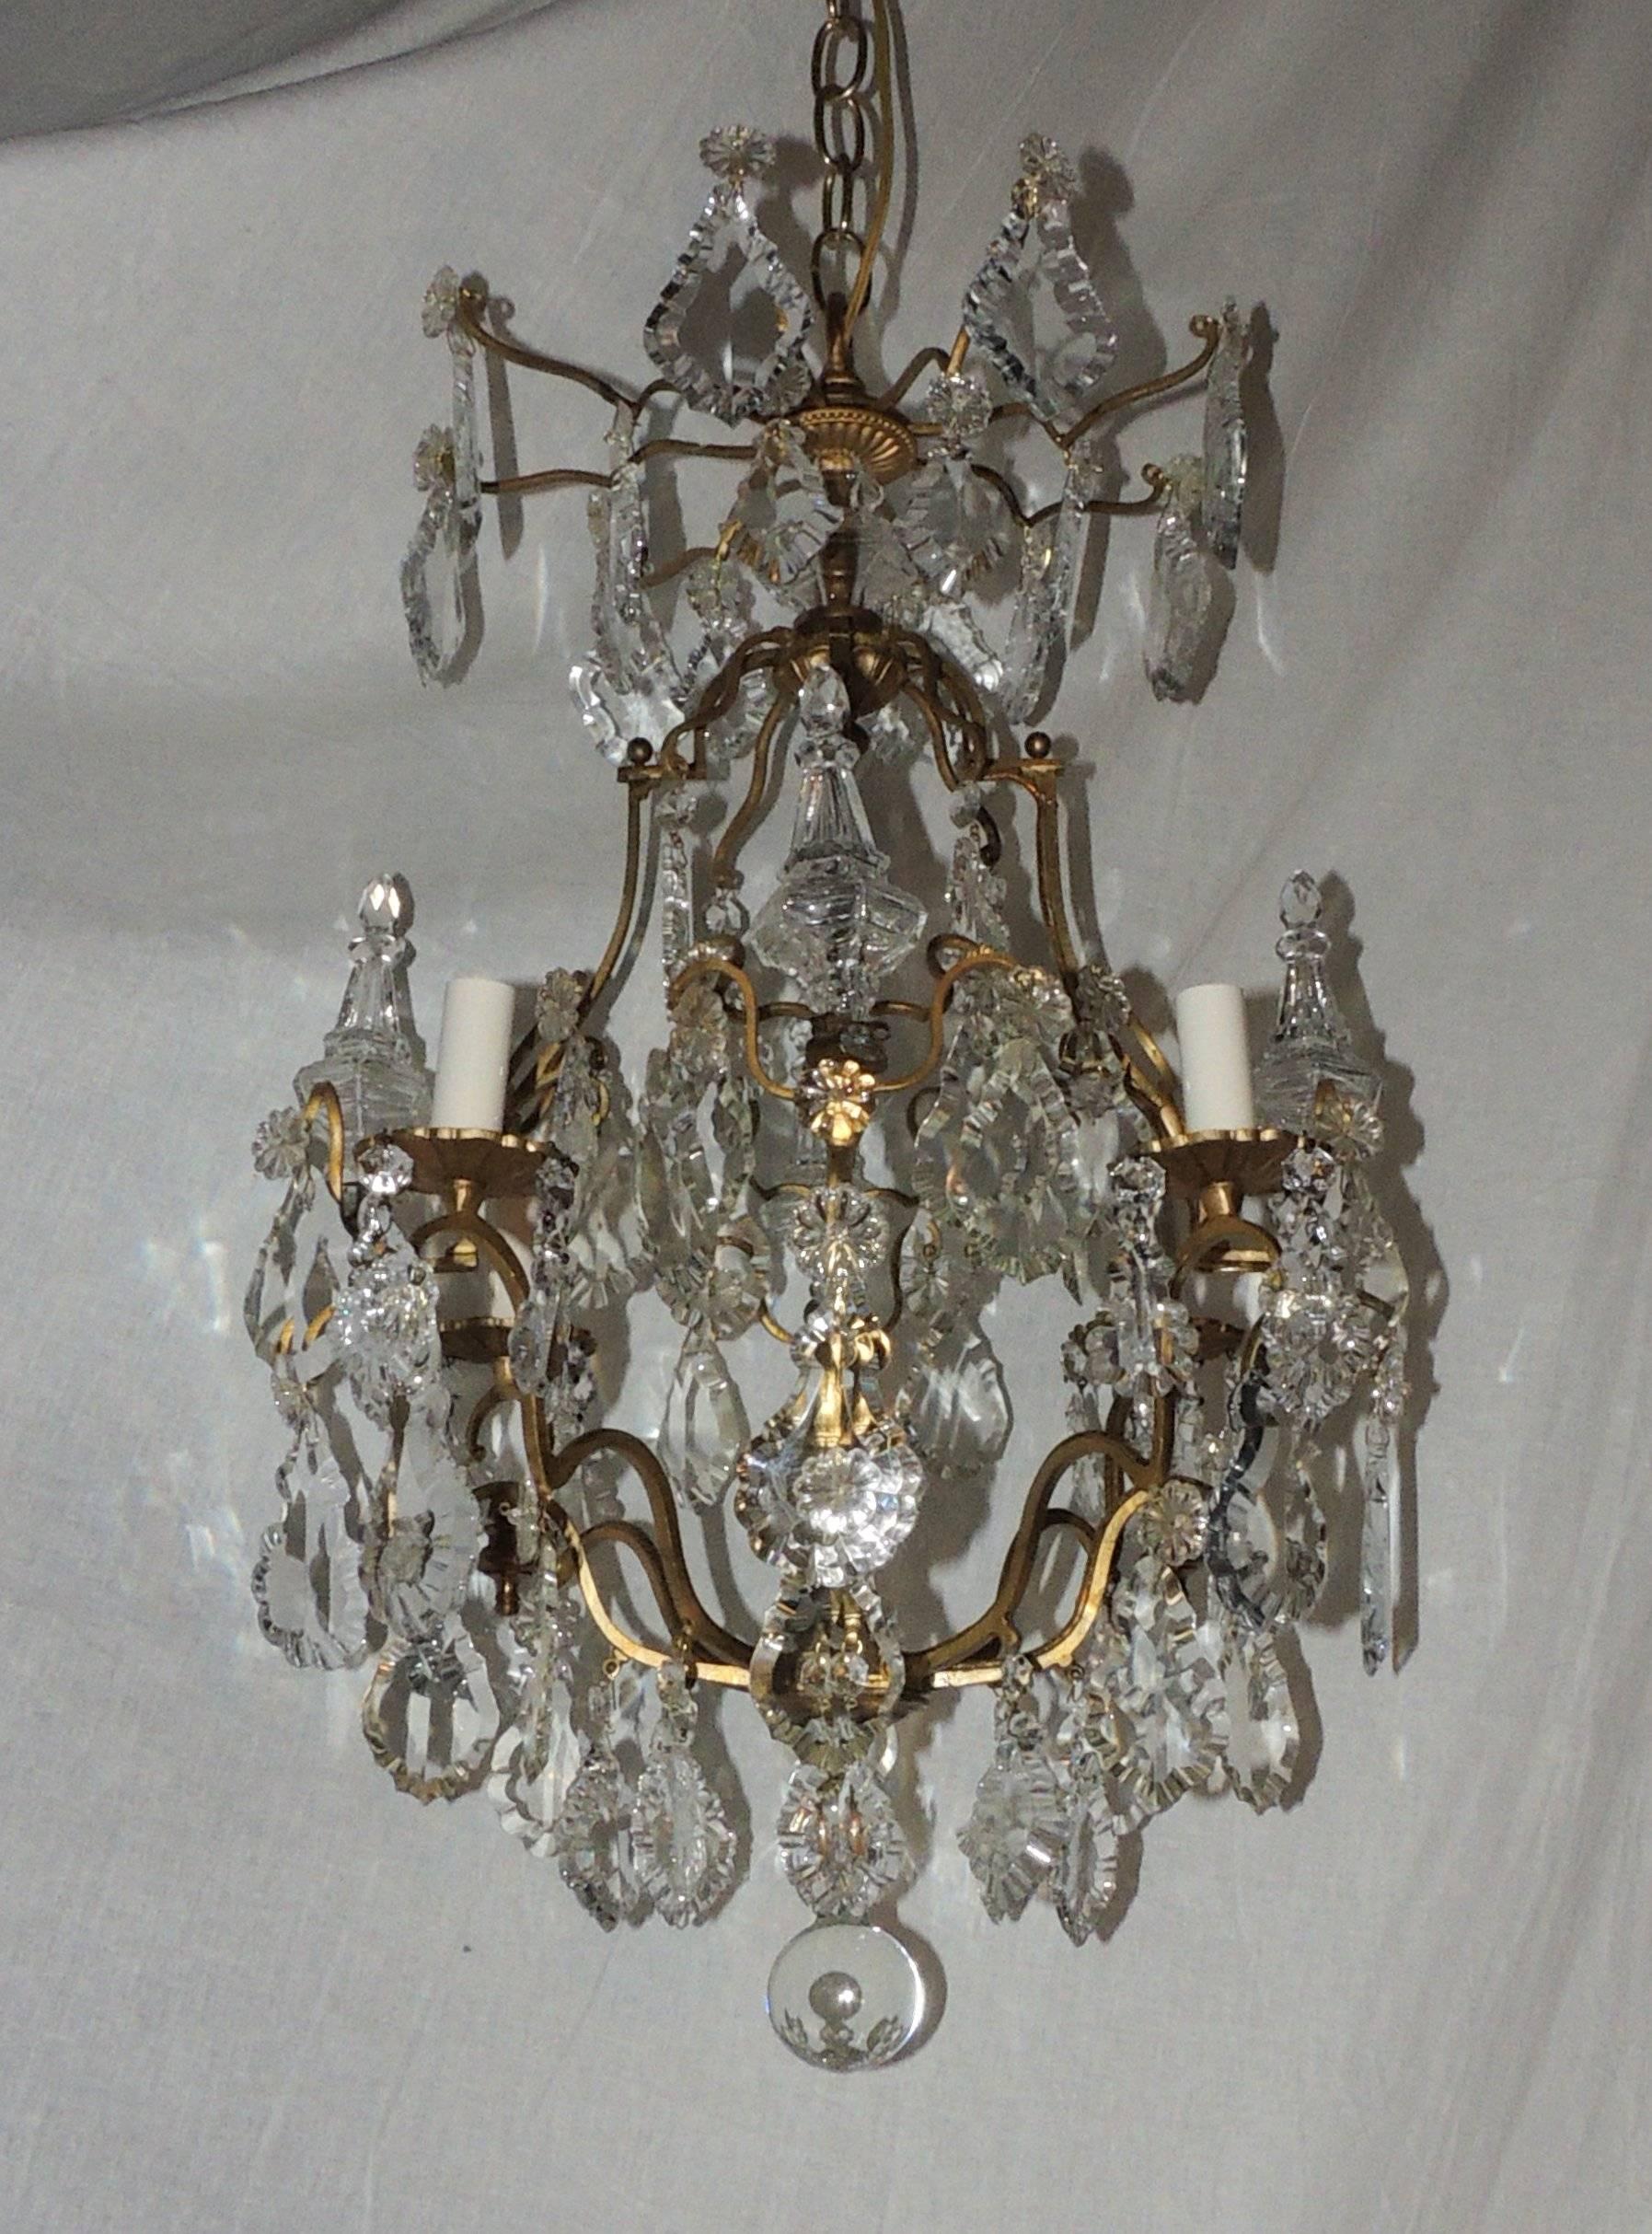 A lovely petite French four-light gilt chandelier decorated with flat bevelled crystals and Obelisk spires accenting the chandelier.

Measures: 25